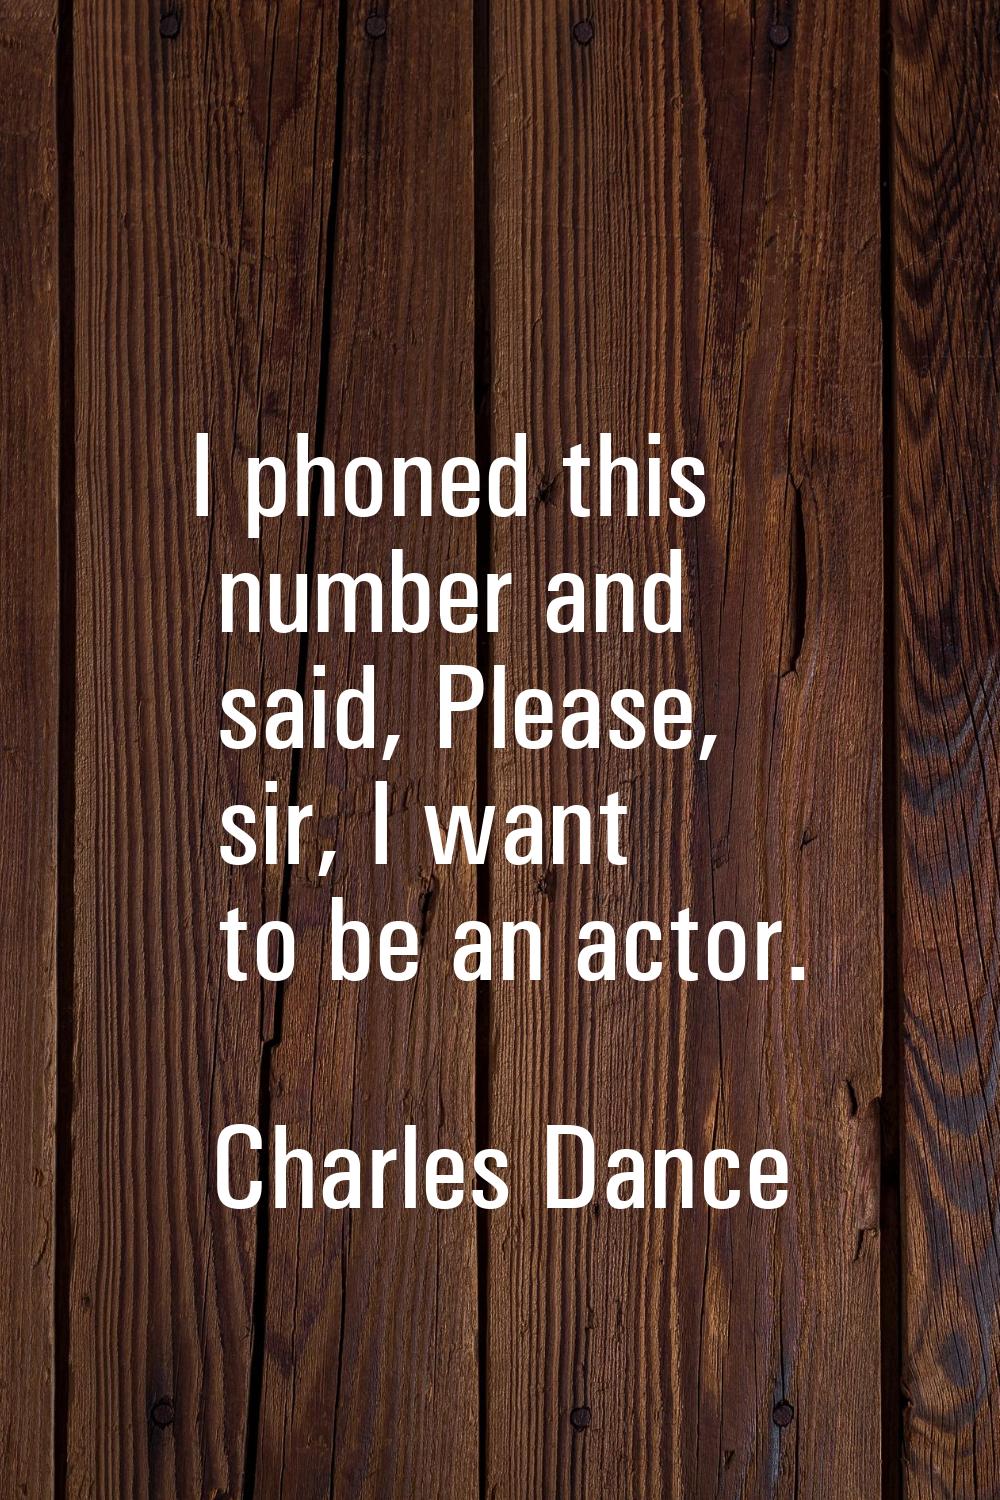 I phoned this number and said, Please, sir, I want to be an actor.